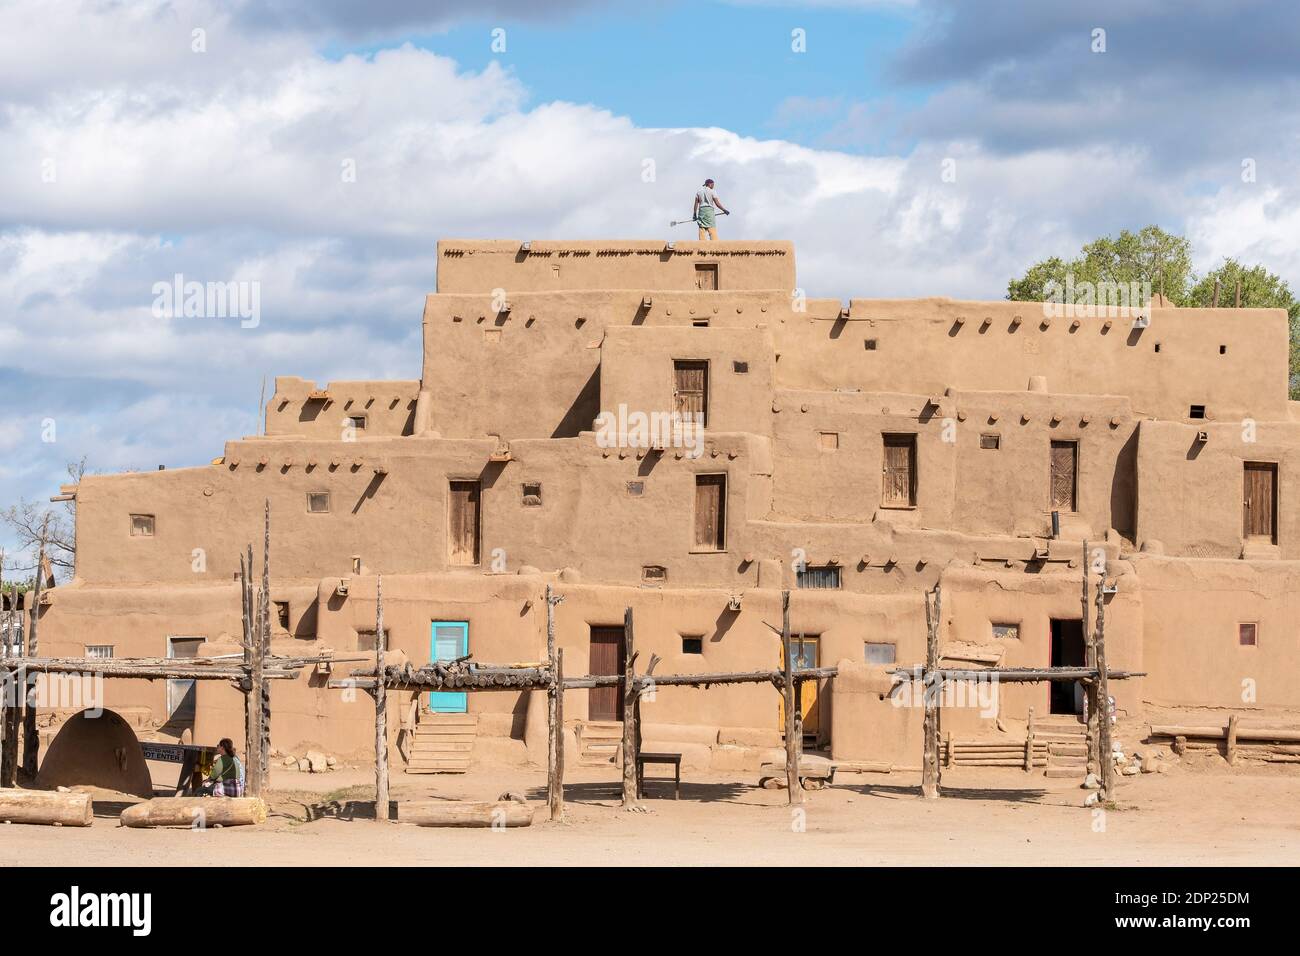 Man cleaning roof of adobe mud brick houses in the historical Native American village of Taos Pueblo, New Mexico, USA. A UNESCO World Heritage Site. Stock Photo